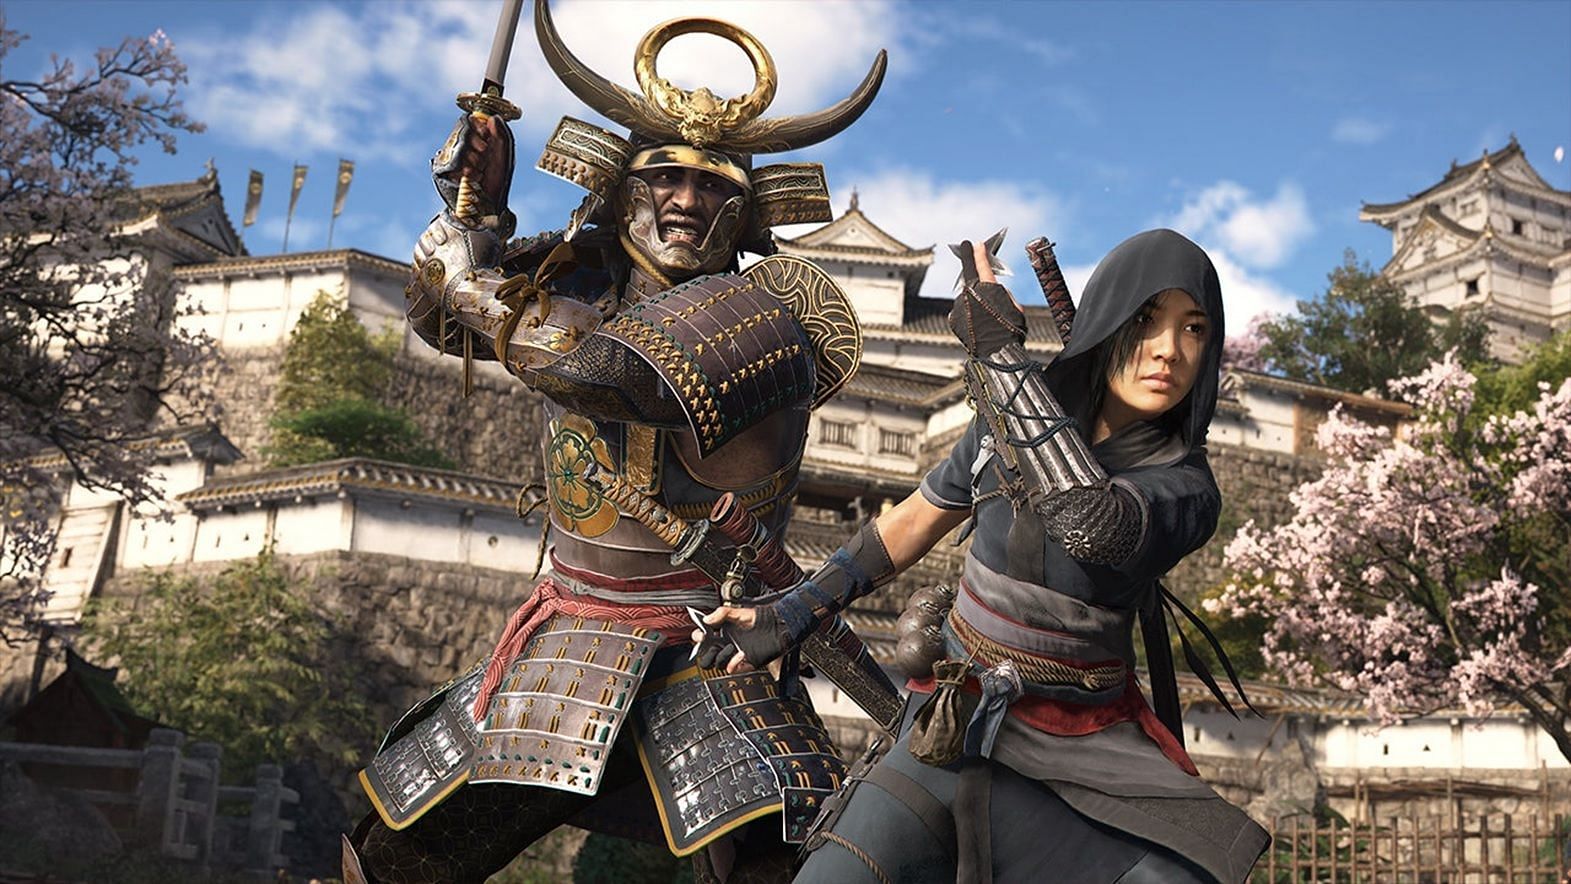 A still from the game showing protagonists Yasuke and Naoe (Image via Ubisoft)